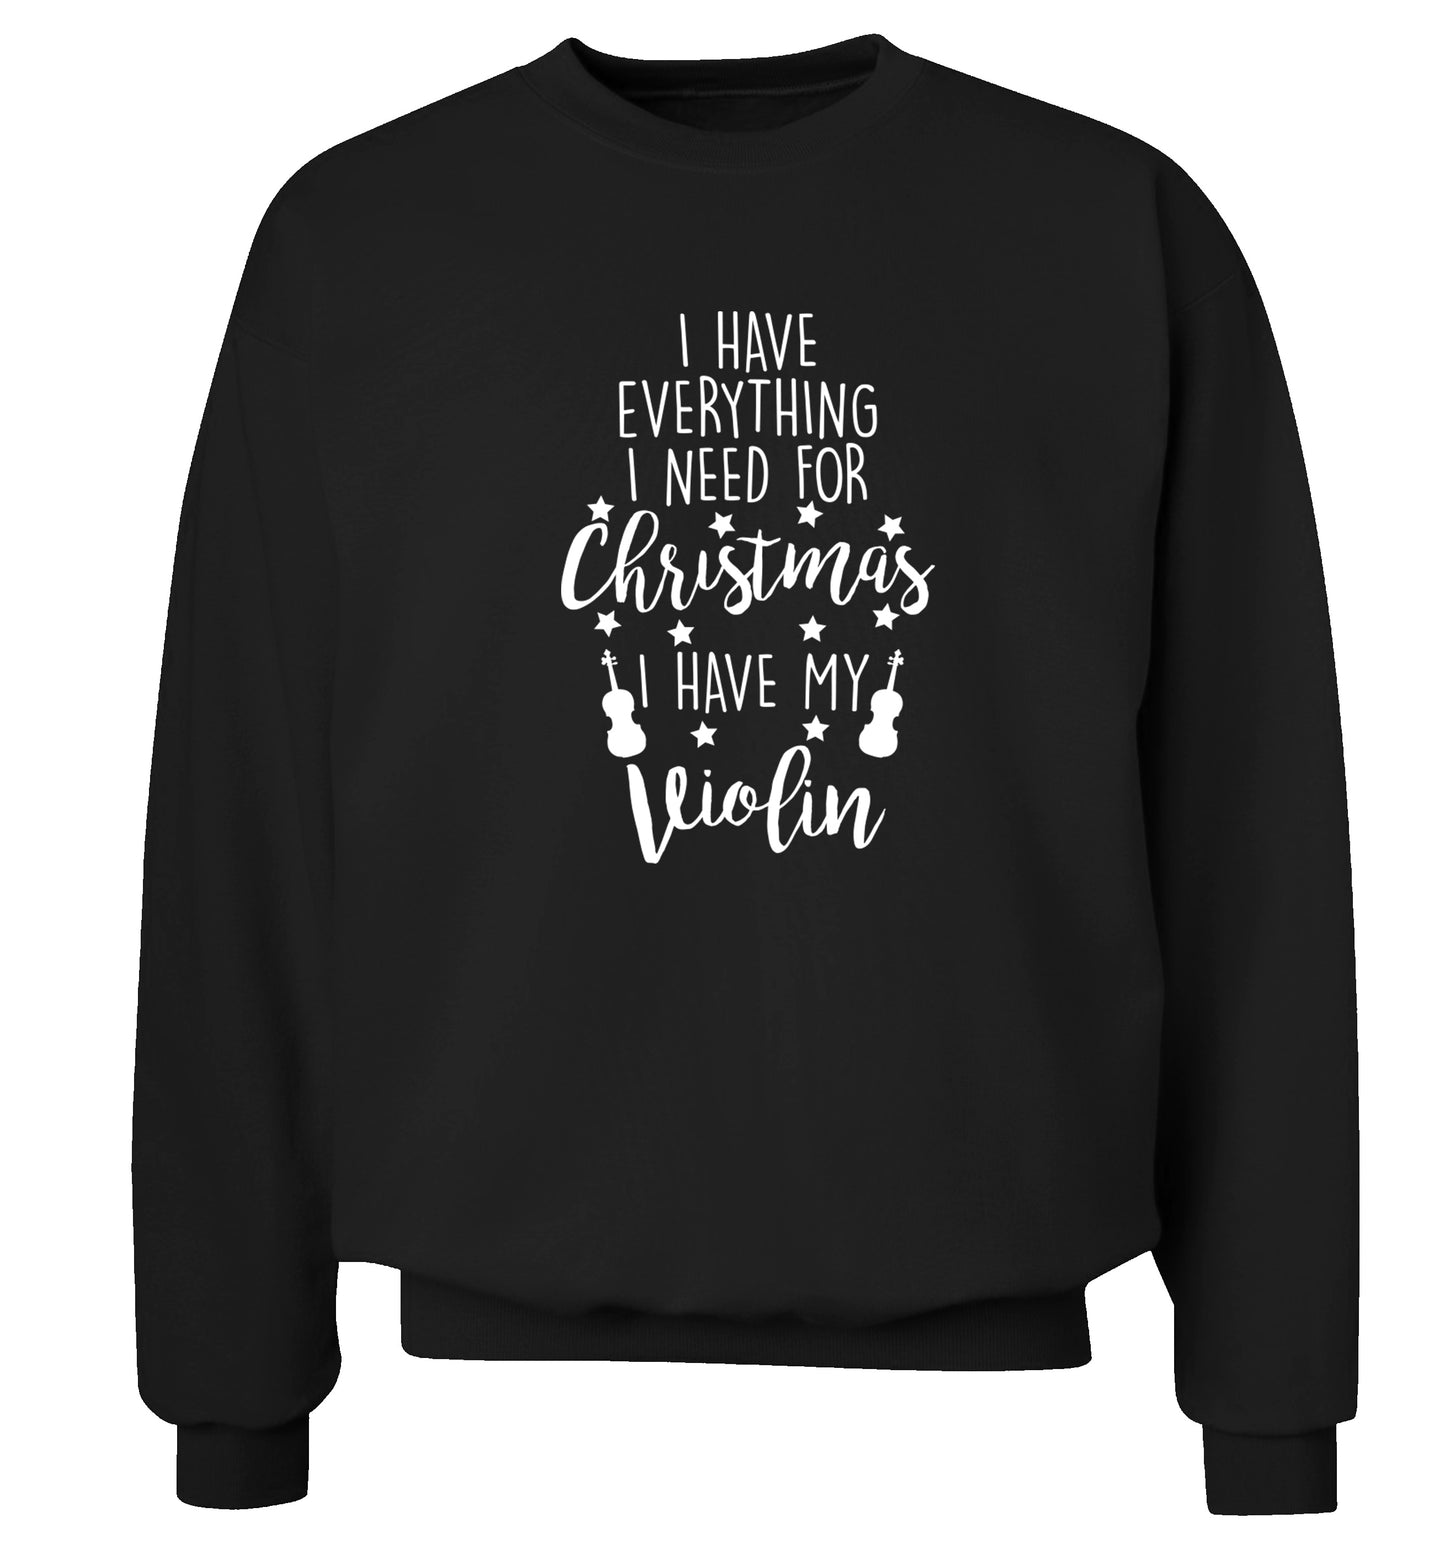 I have everything I need for Christmas I have my violin Adult's unisex black Sweater 2XL